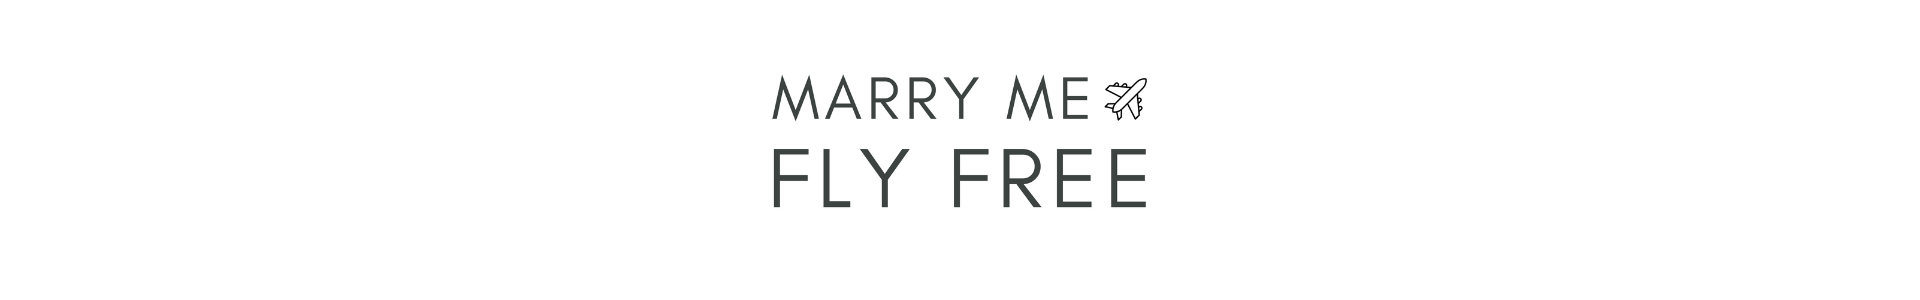 travel blog marry me fly free